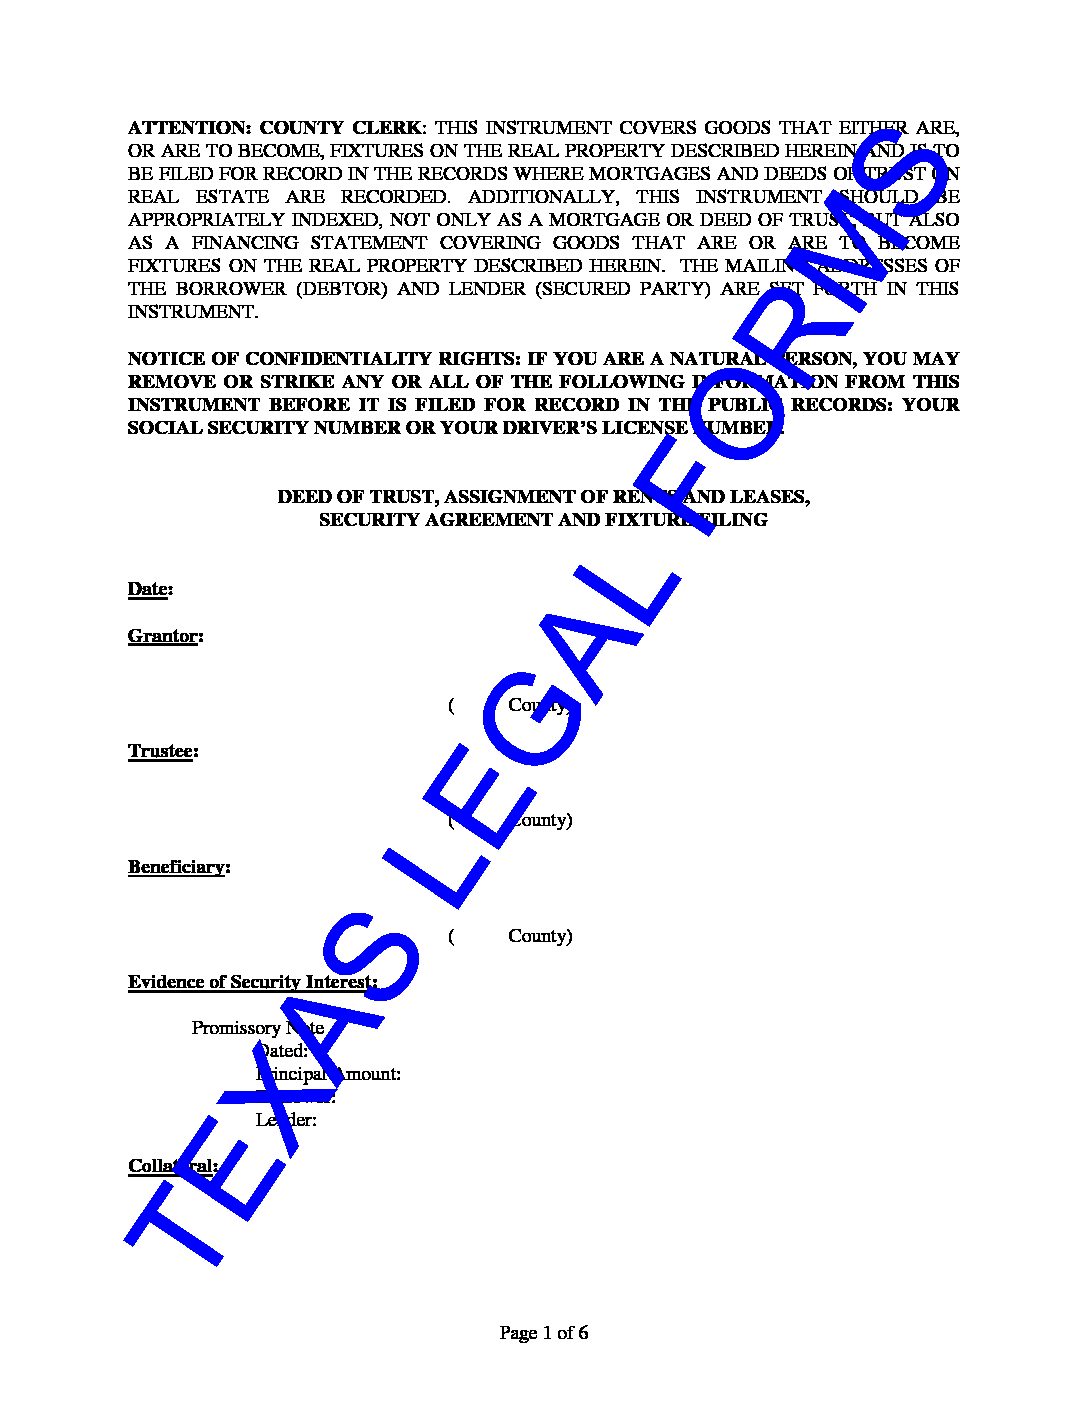 texas-deed-of-trust-form-download-essential-real-estate-legal-forms